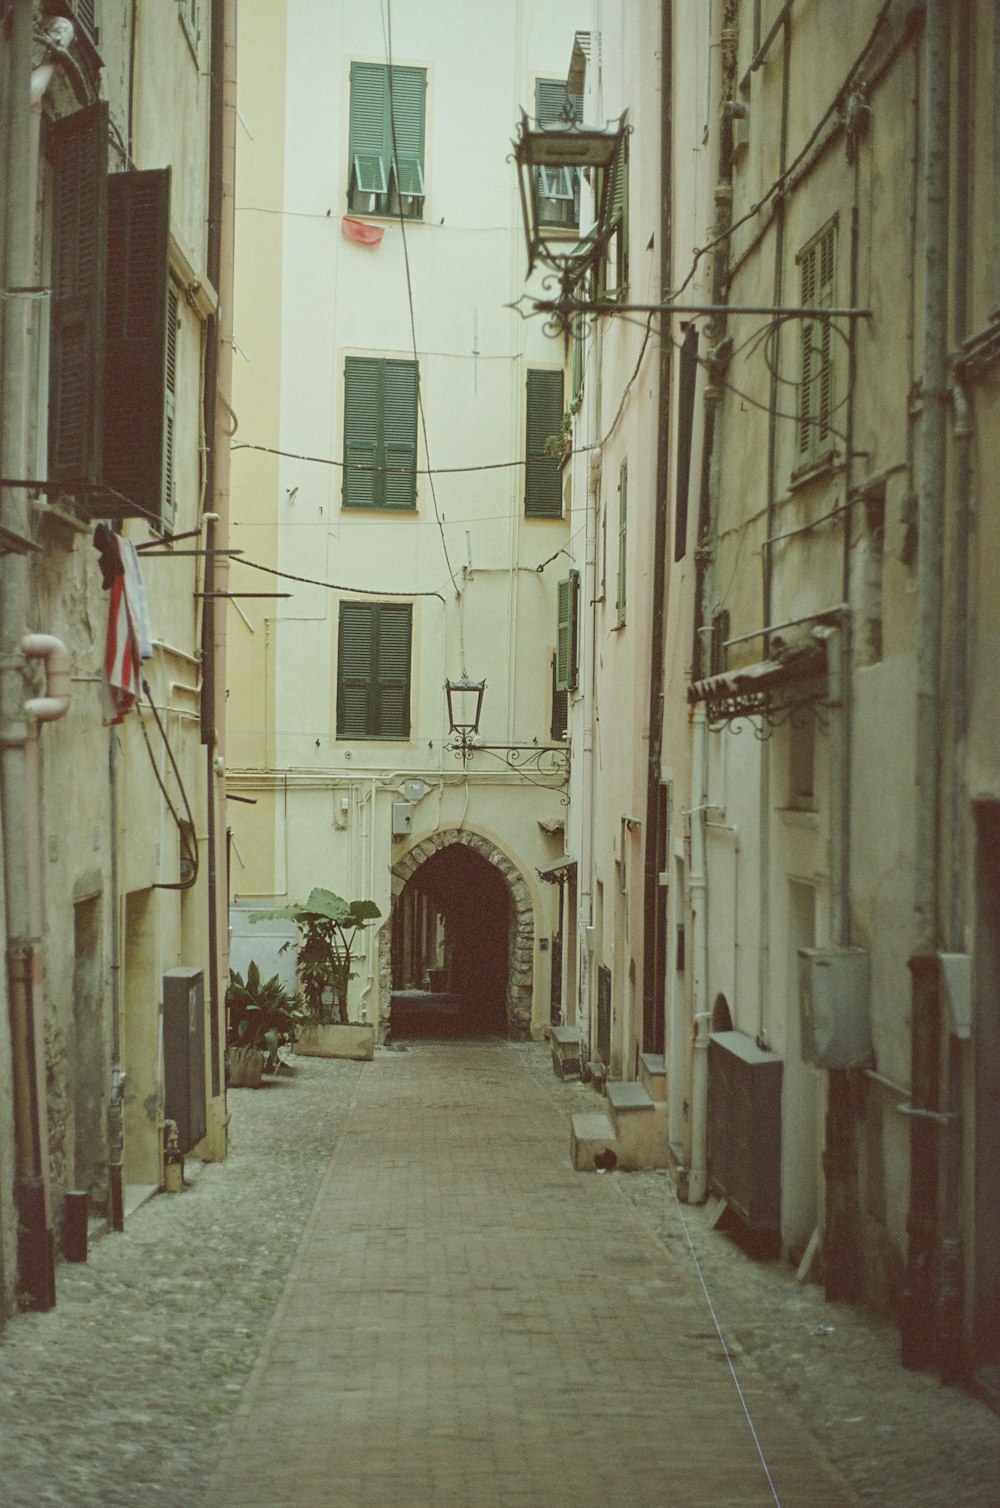 a narrow alley way with a clock tower in the distance